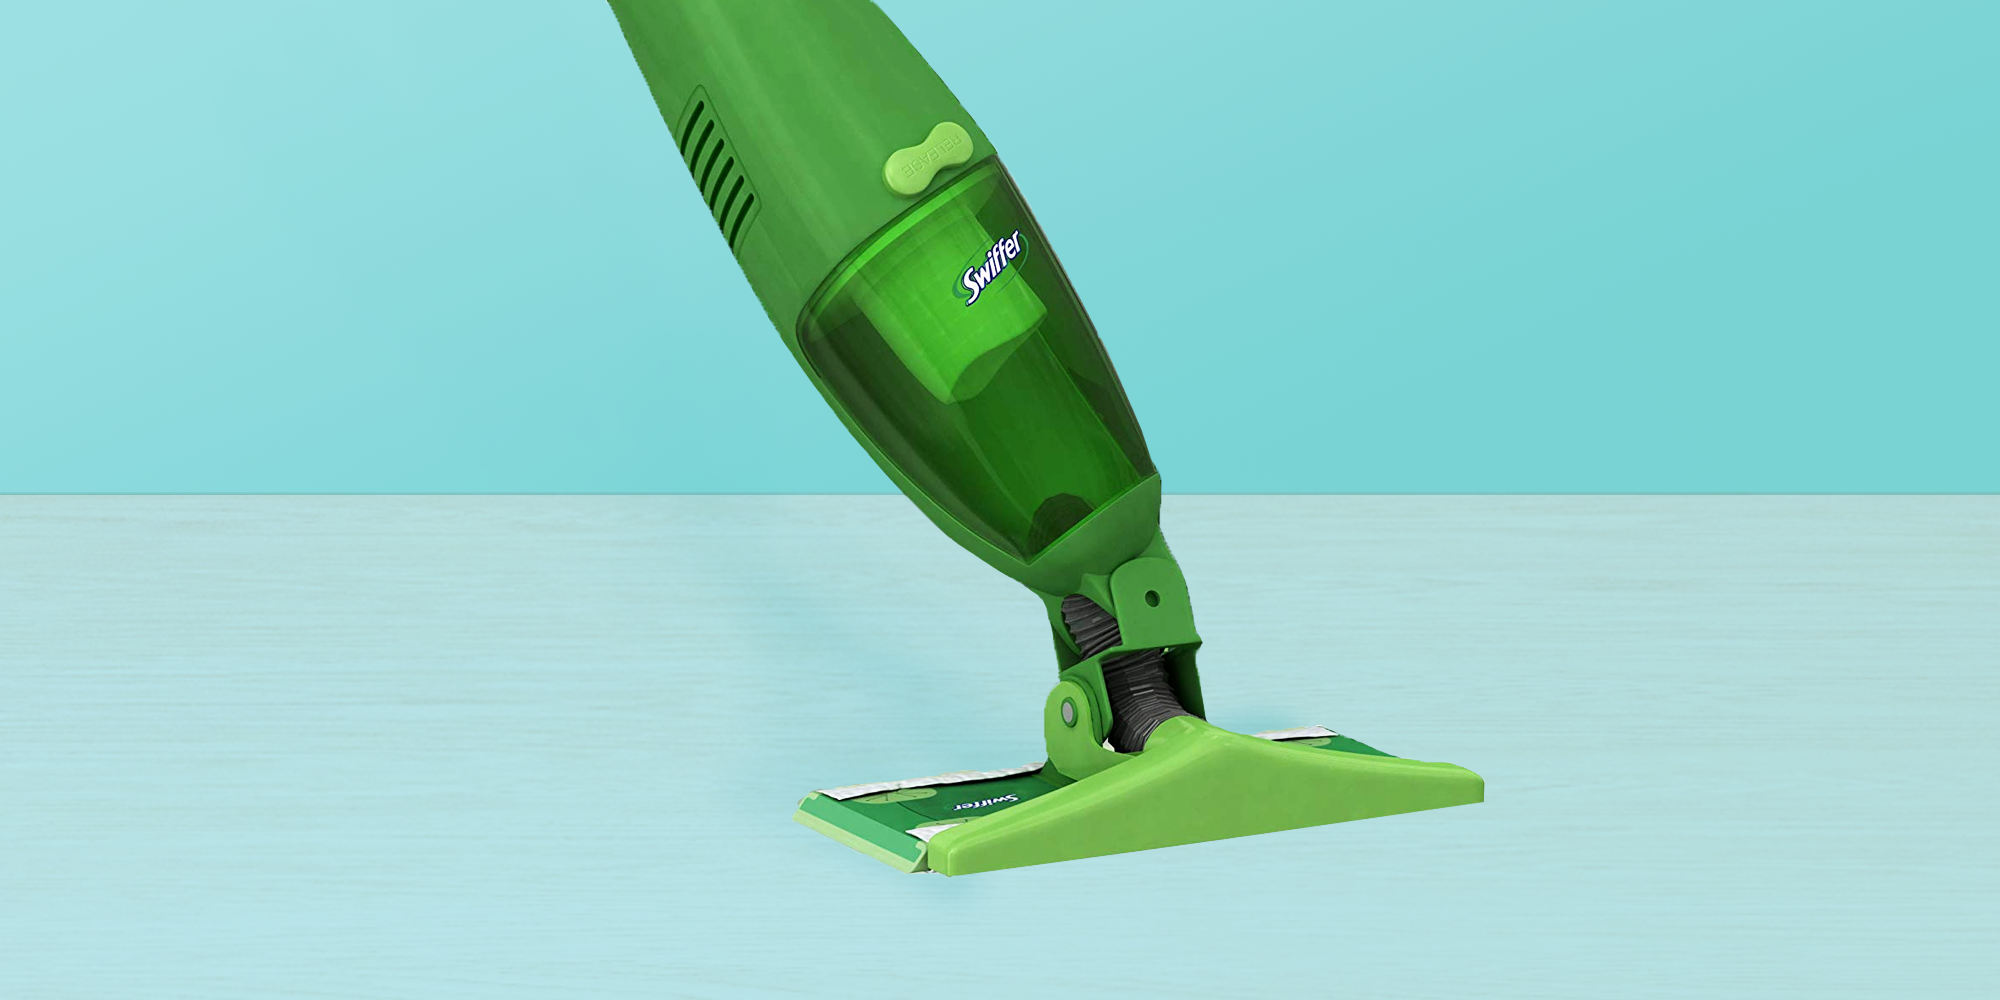 8 Best Vacuums For Hardwood Floors To, What Shark Vacuum Is Best For Hardwood Floors